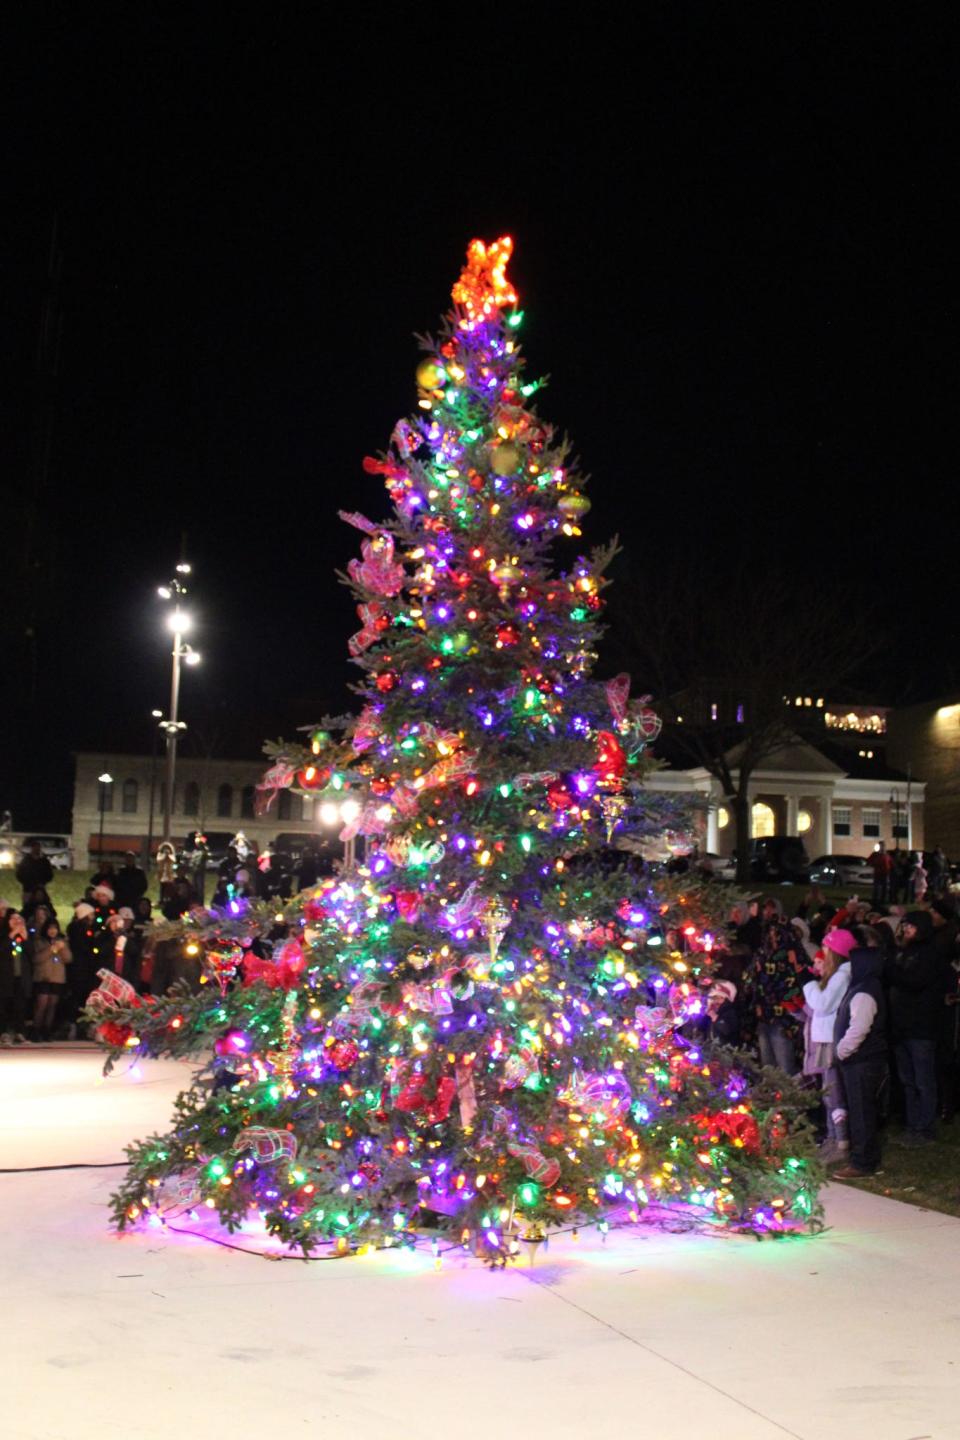 Tree lighting from 2022 Elkhart Winterfest. This year's festival will be held Dec. 1.